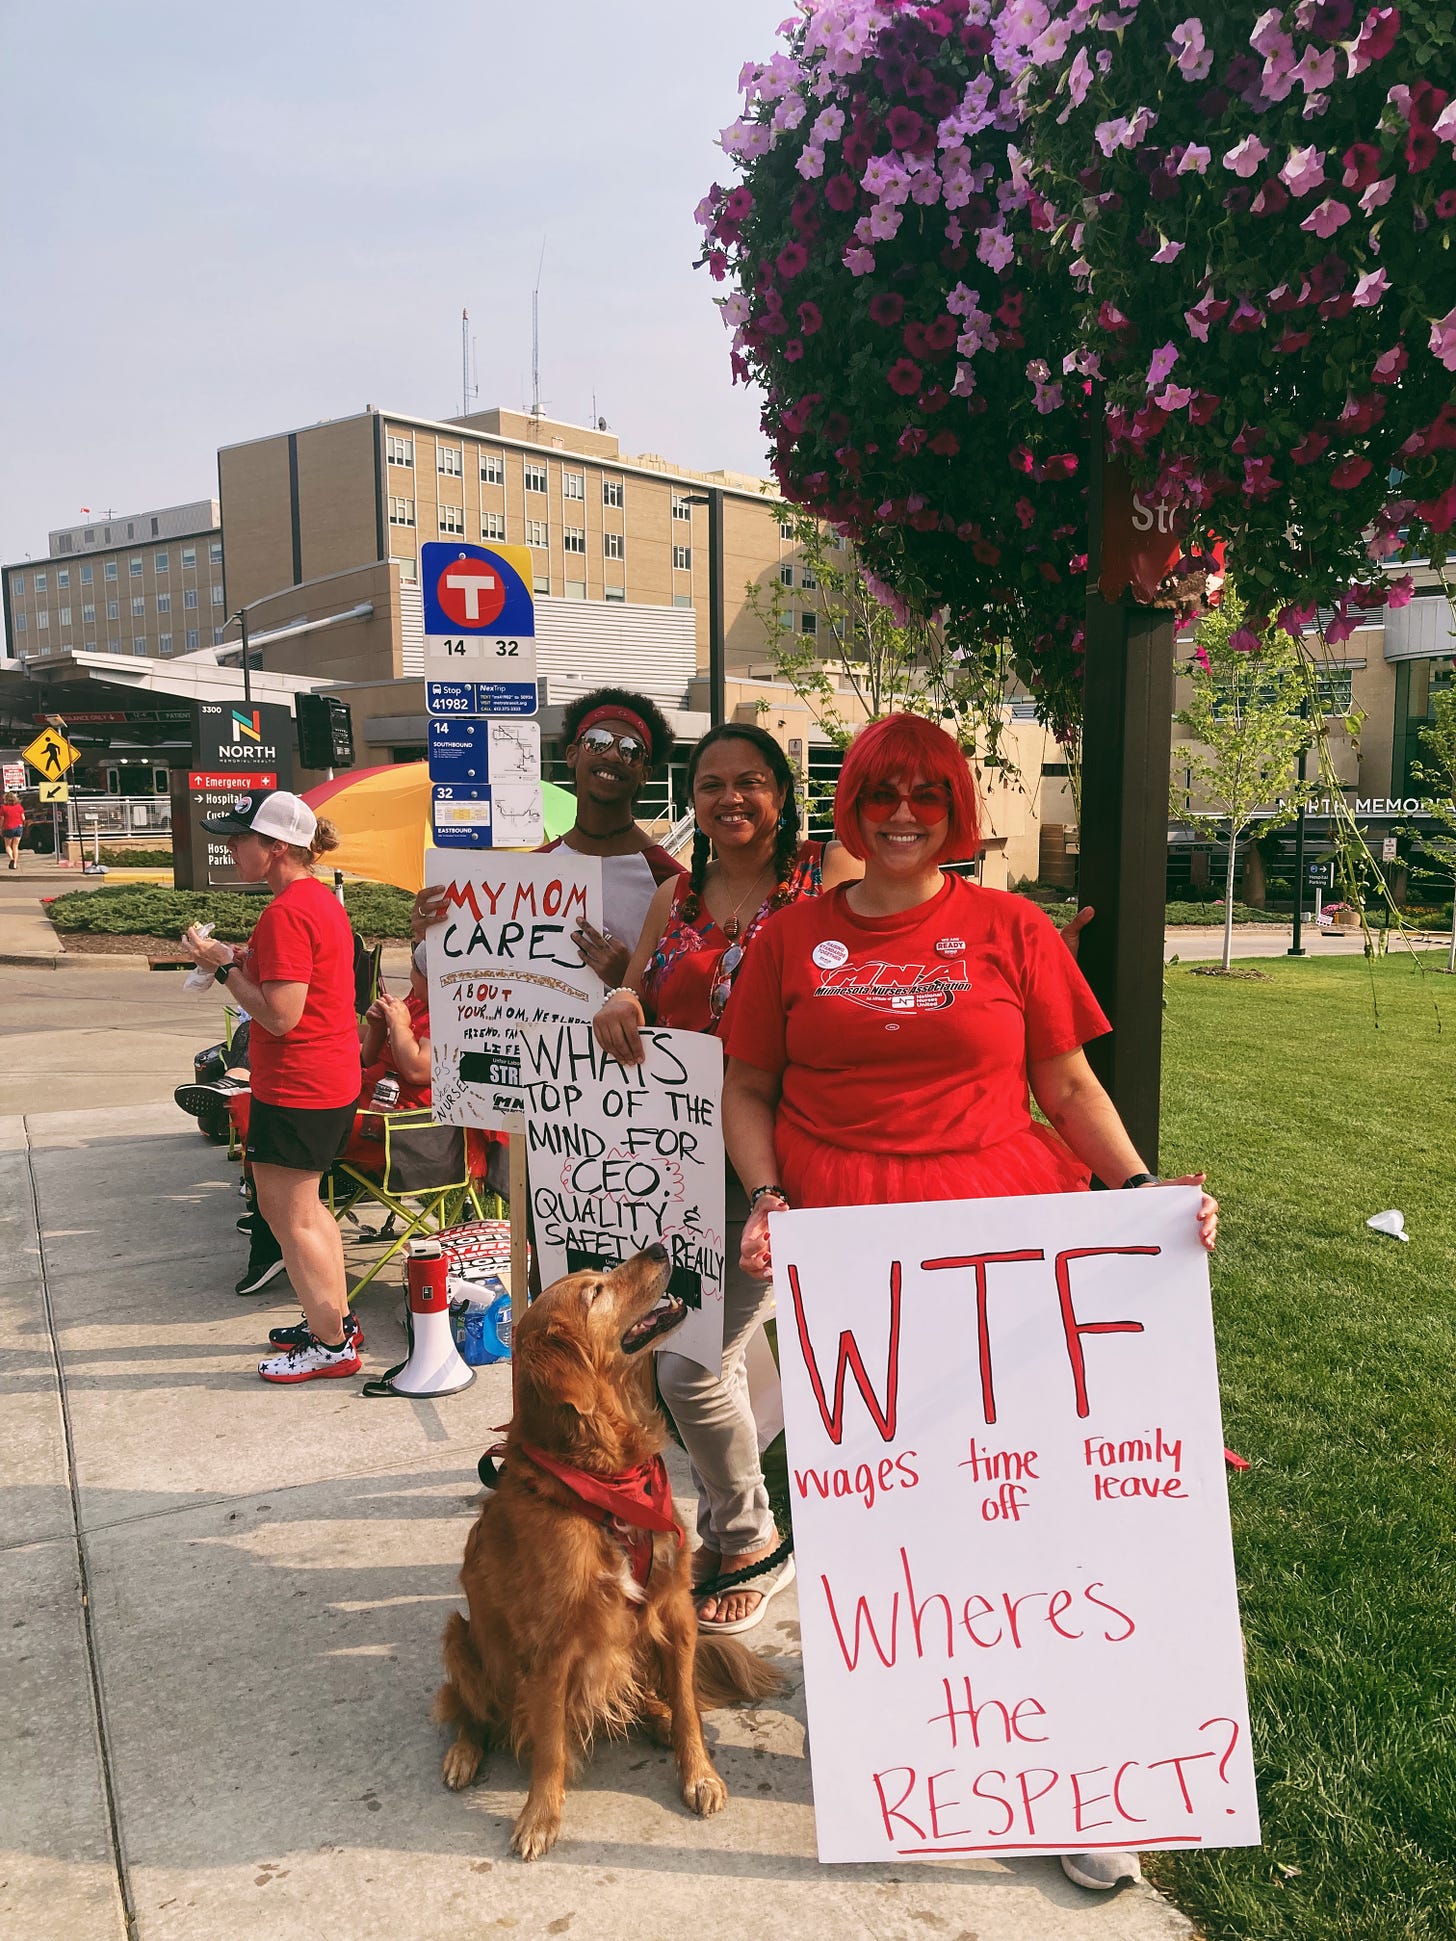 a few picketers dressed in red, one wearing a red wig, smile and hold signs. a golden retriever looks up at one of the picketers who holds a sign that reads "WTF: wages, time off, family leave"